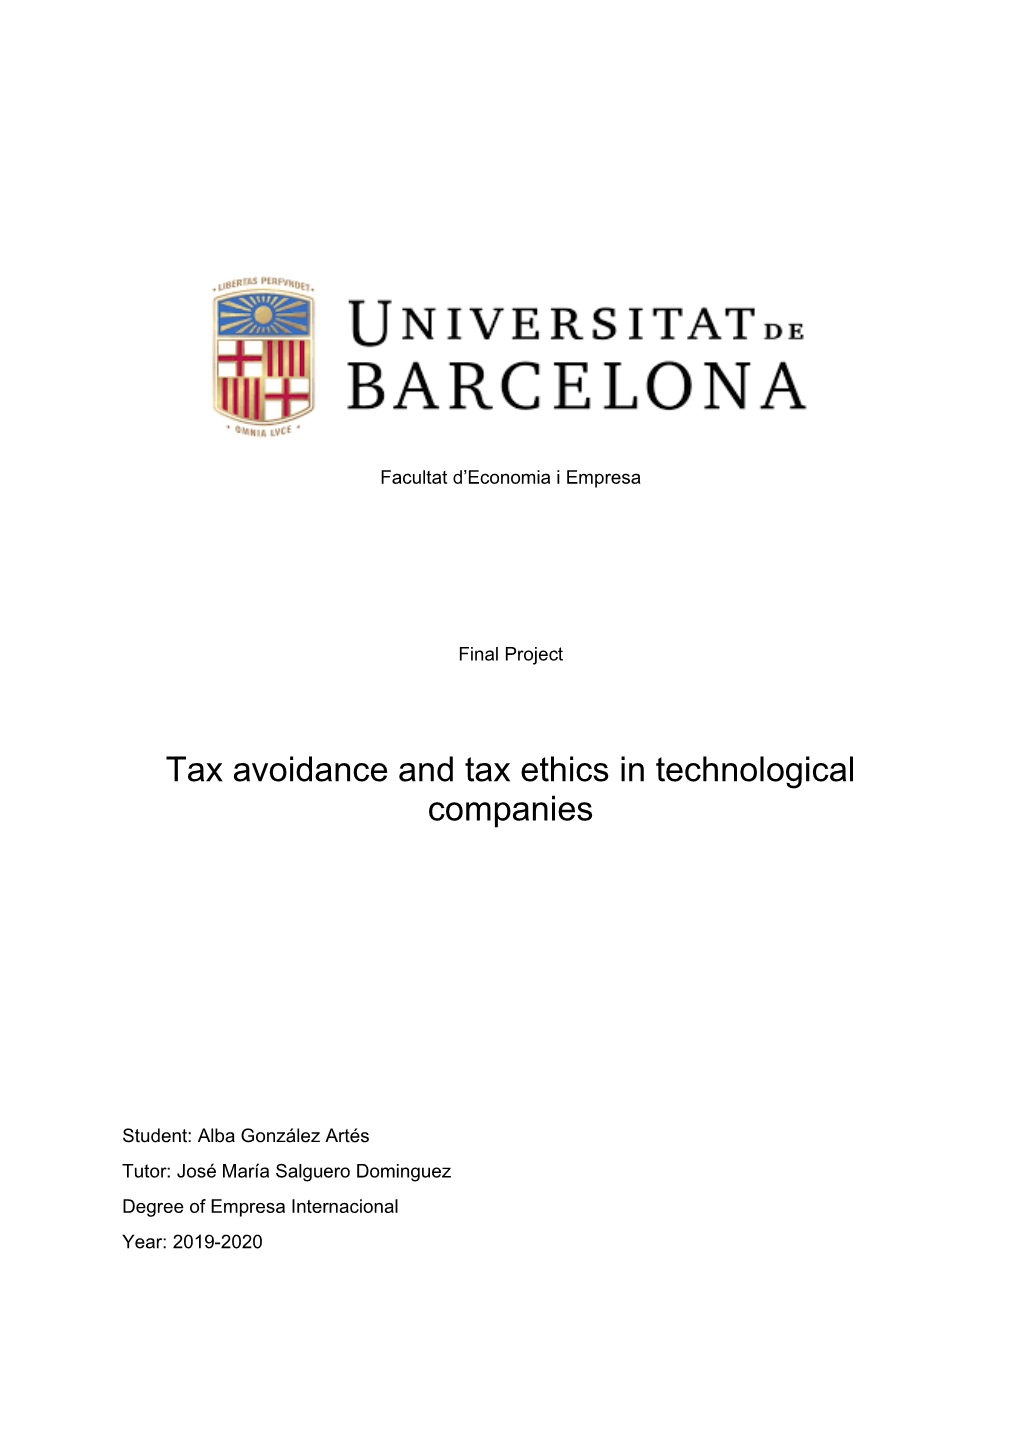 Tax Avoidance and Tax Ethics in Technological Companies